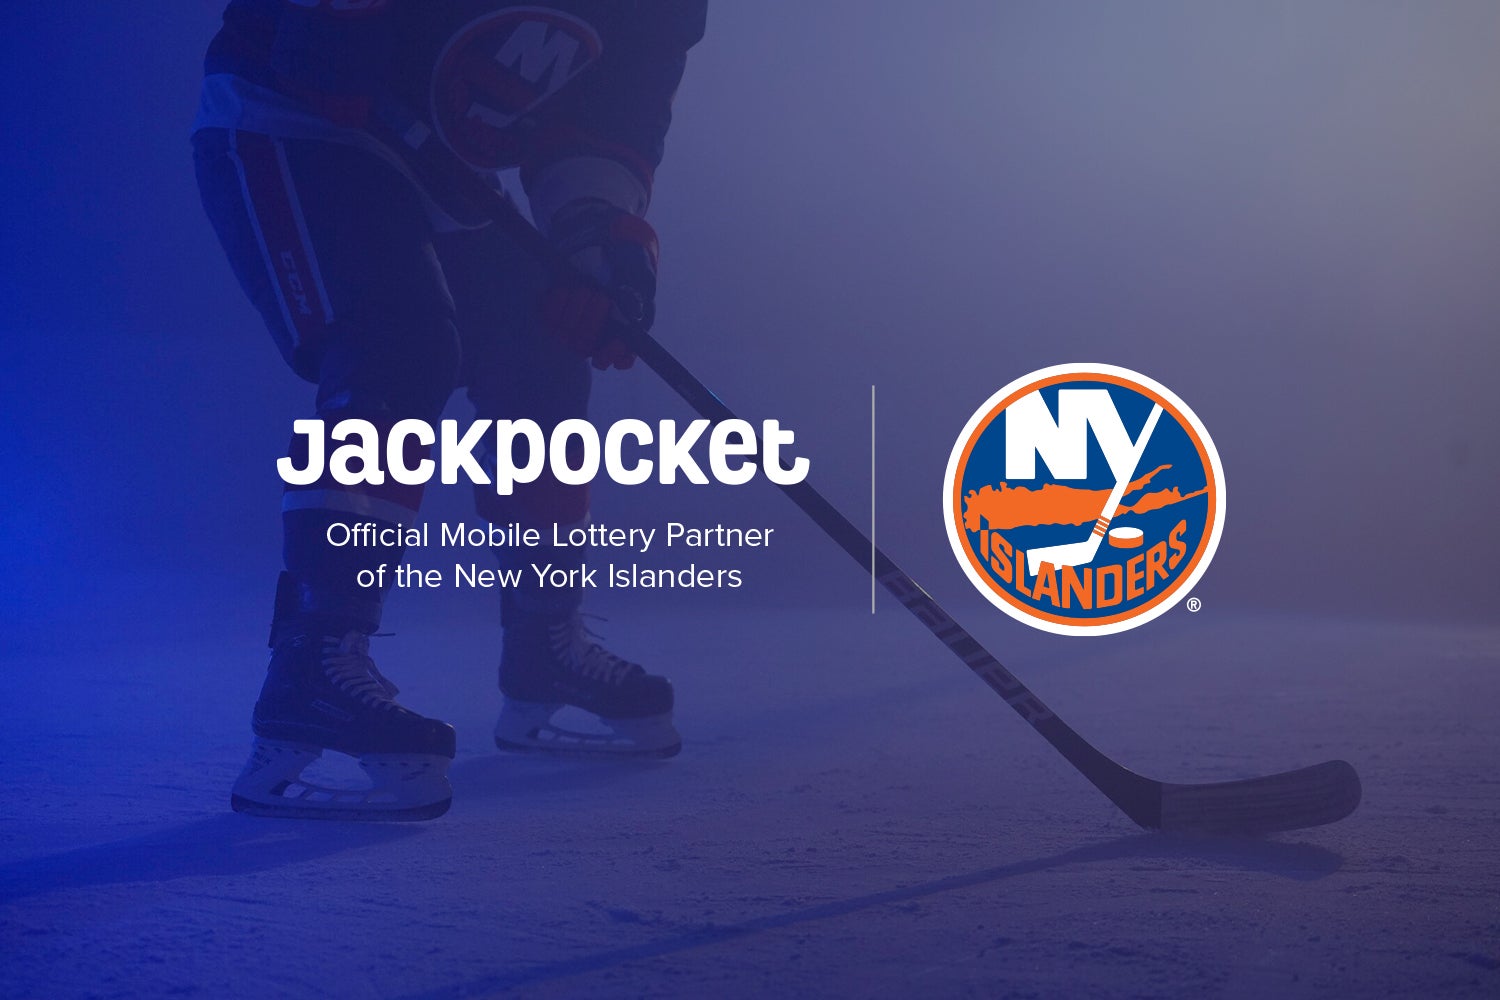 Jackpocket is the official mobile lottery partner of the New York Islanders